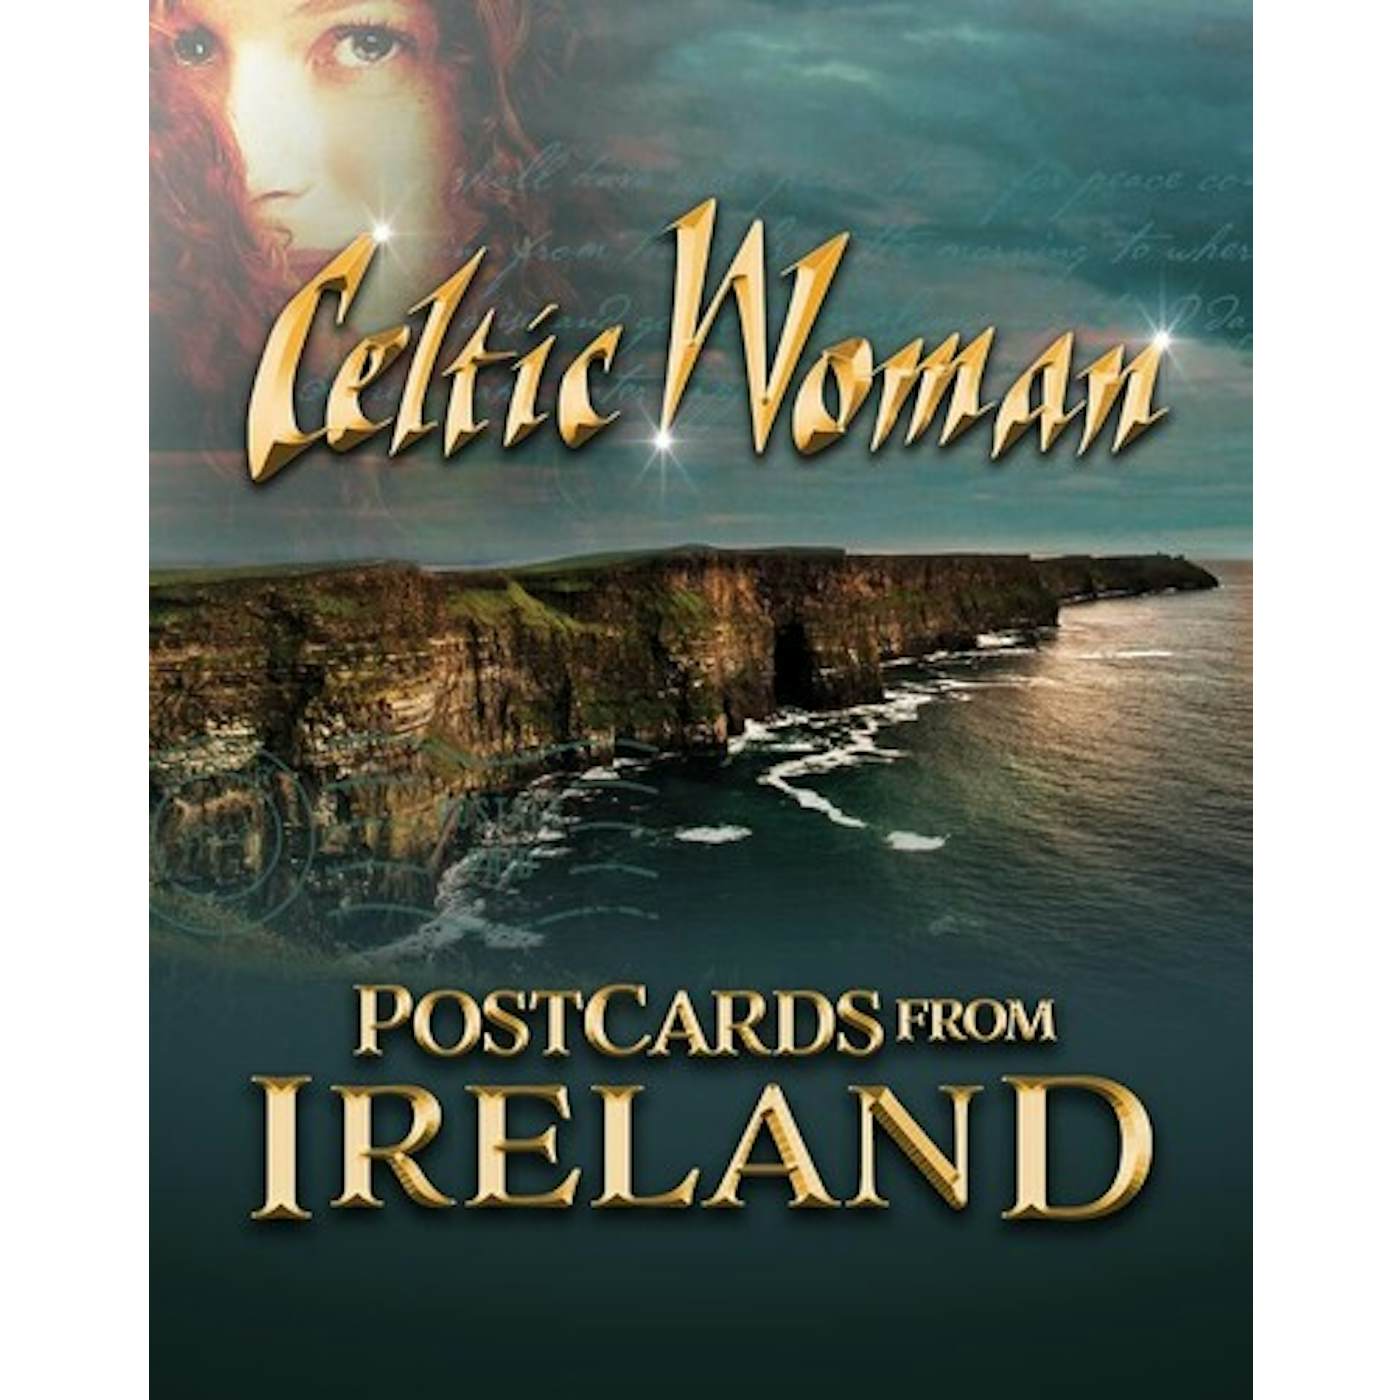 Celtic Woman POSTCARDS FROM IRELAND DVD